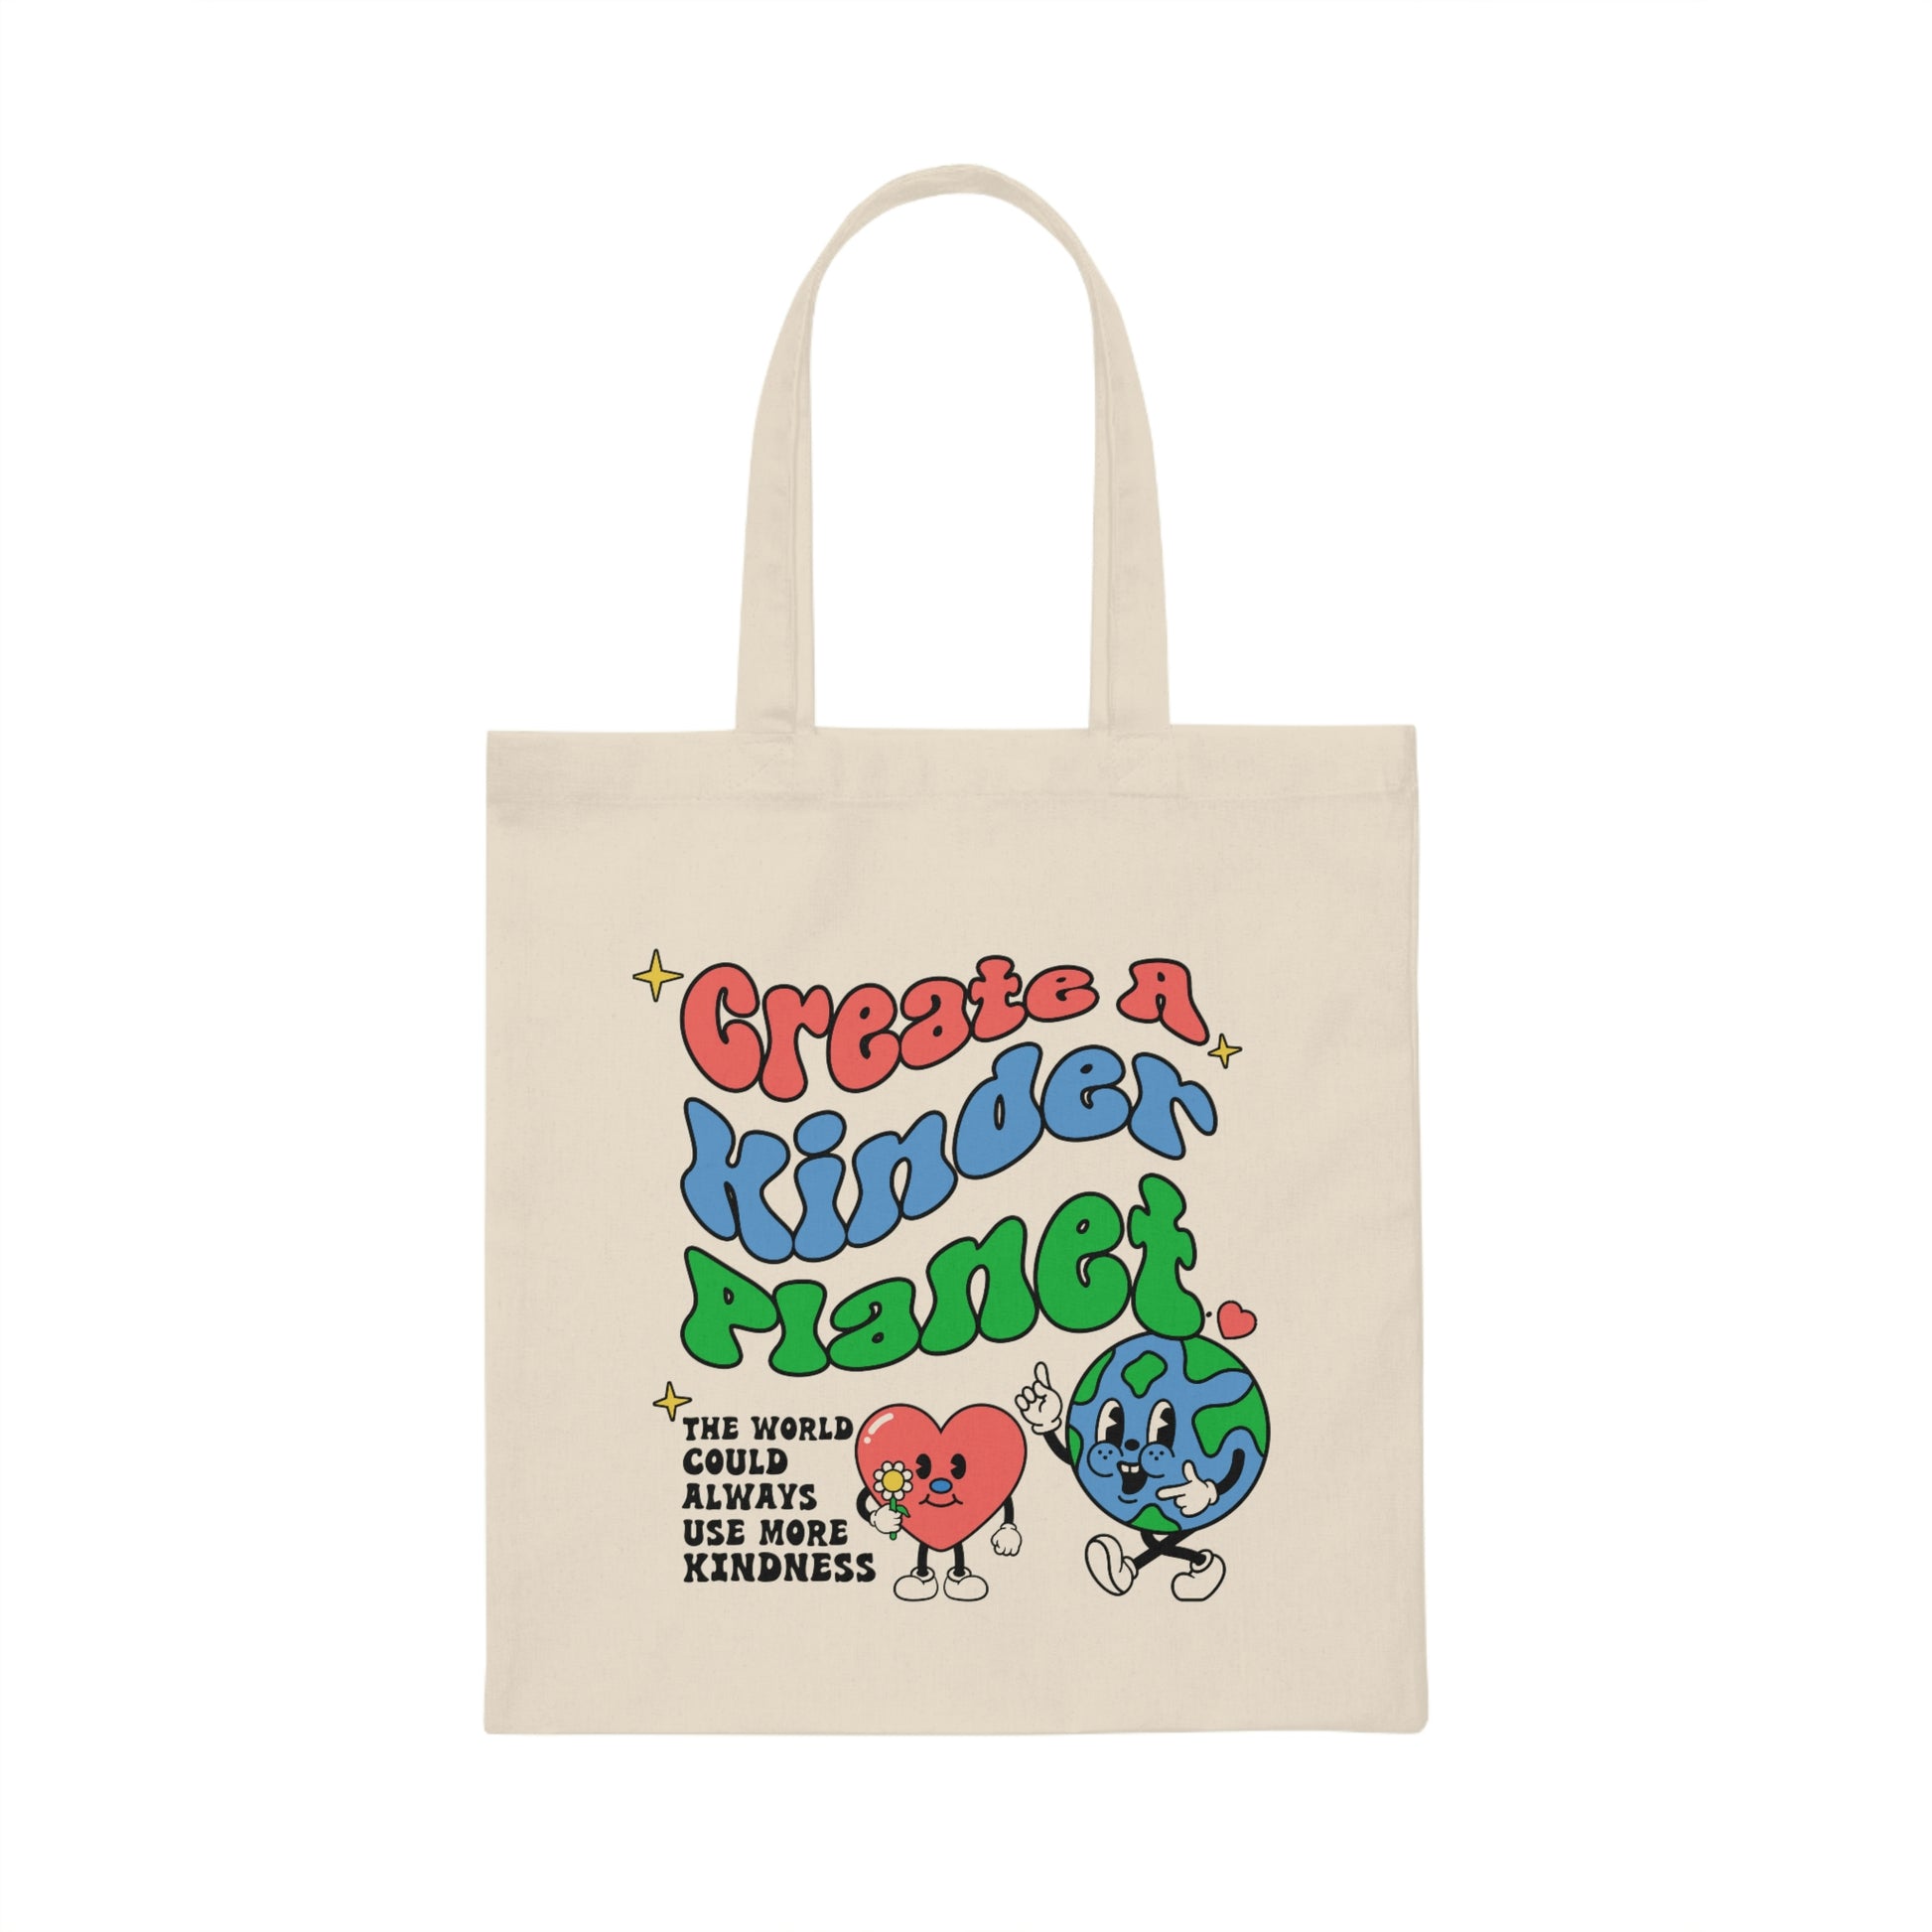 The World could always use more kindness cute cotton tote bag with heart and earth for earth day gift